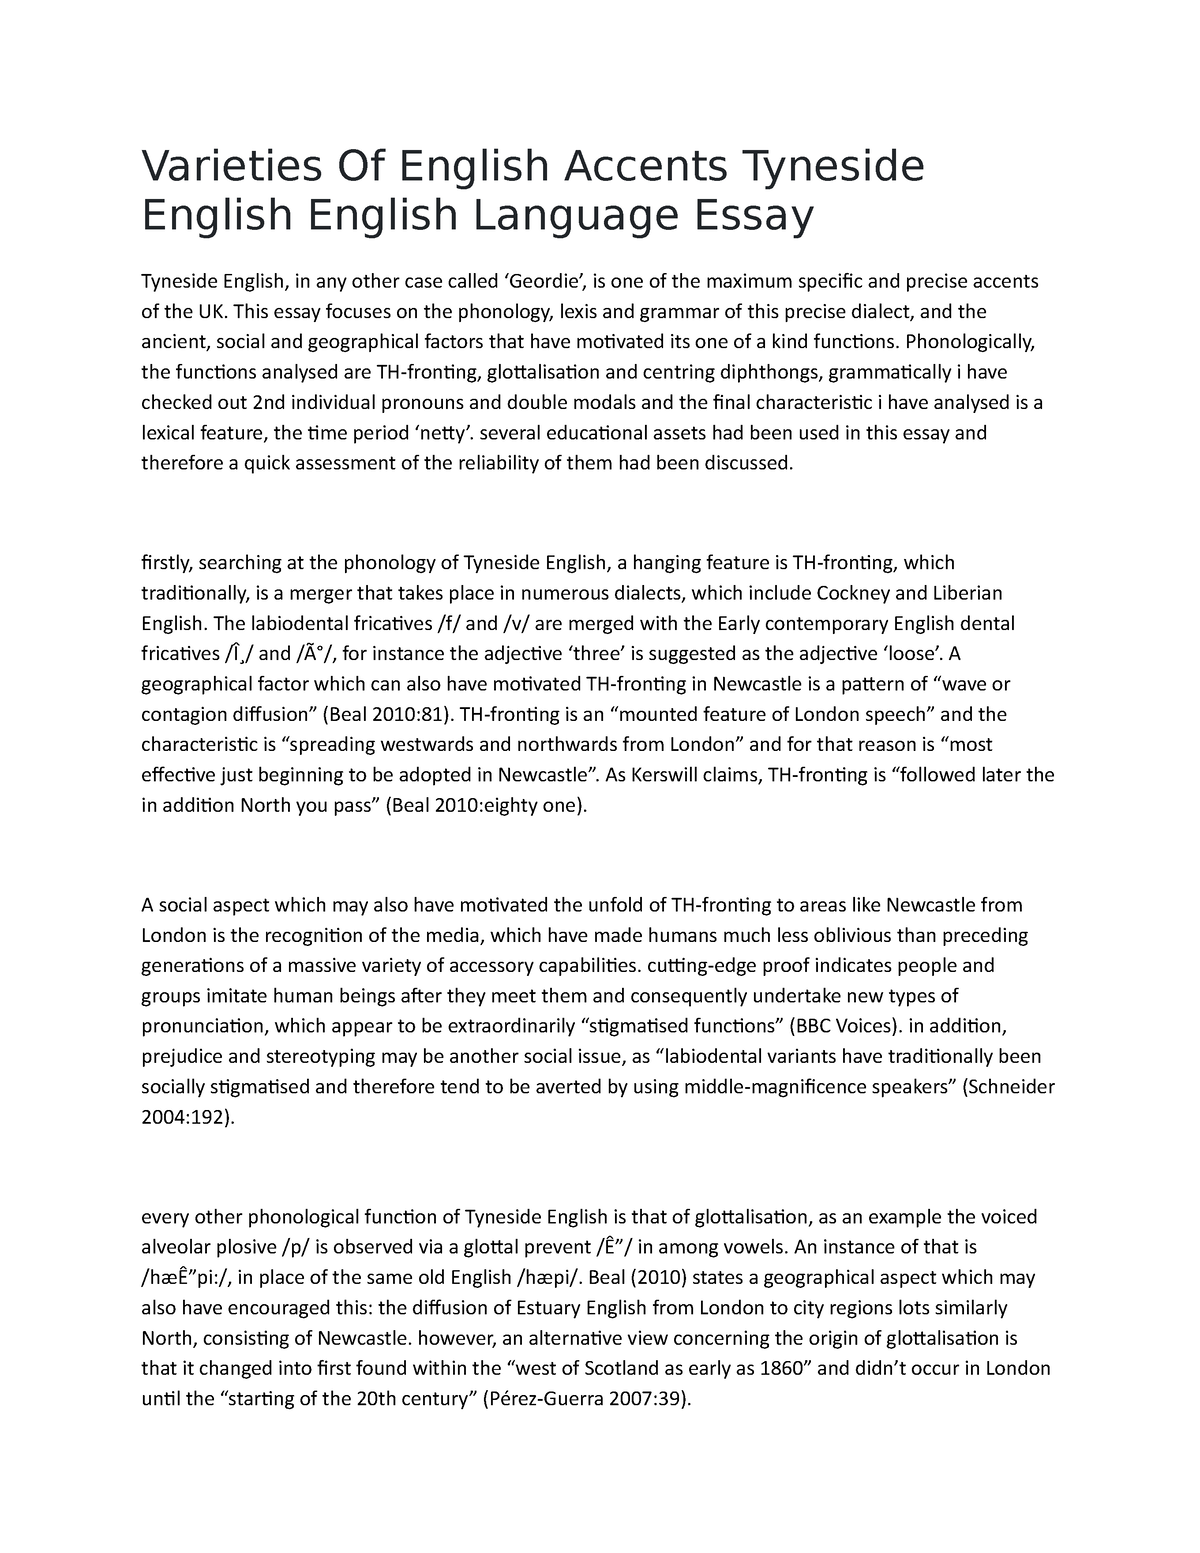 essay about varieties of english